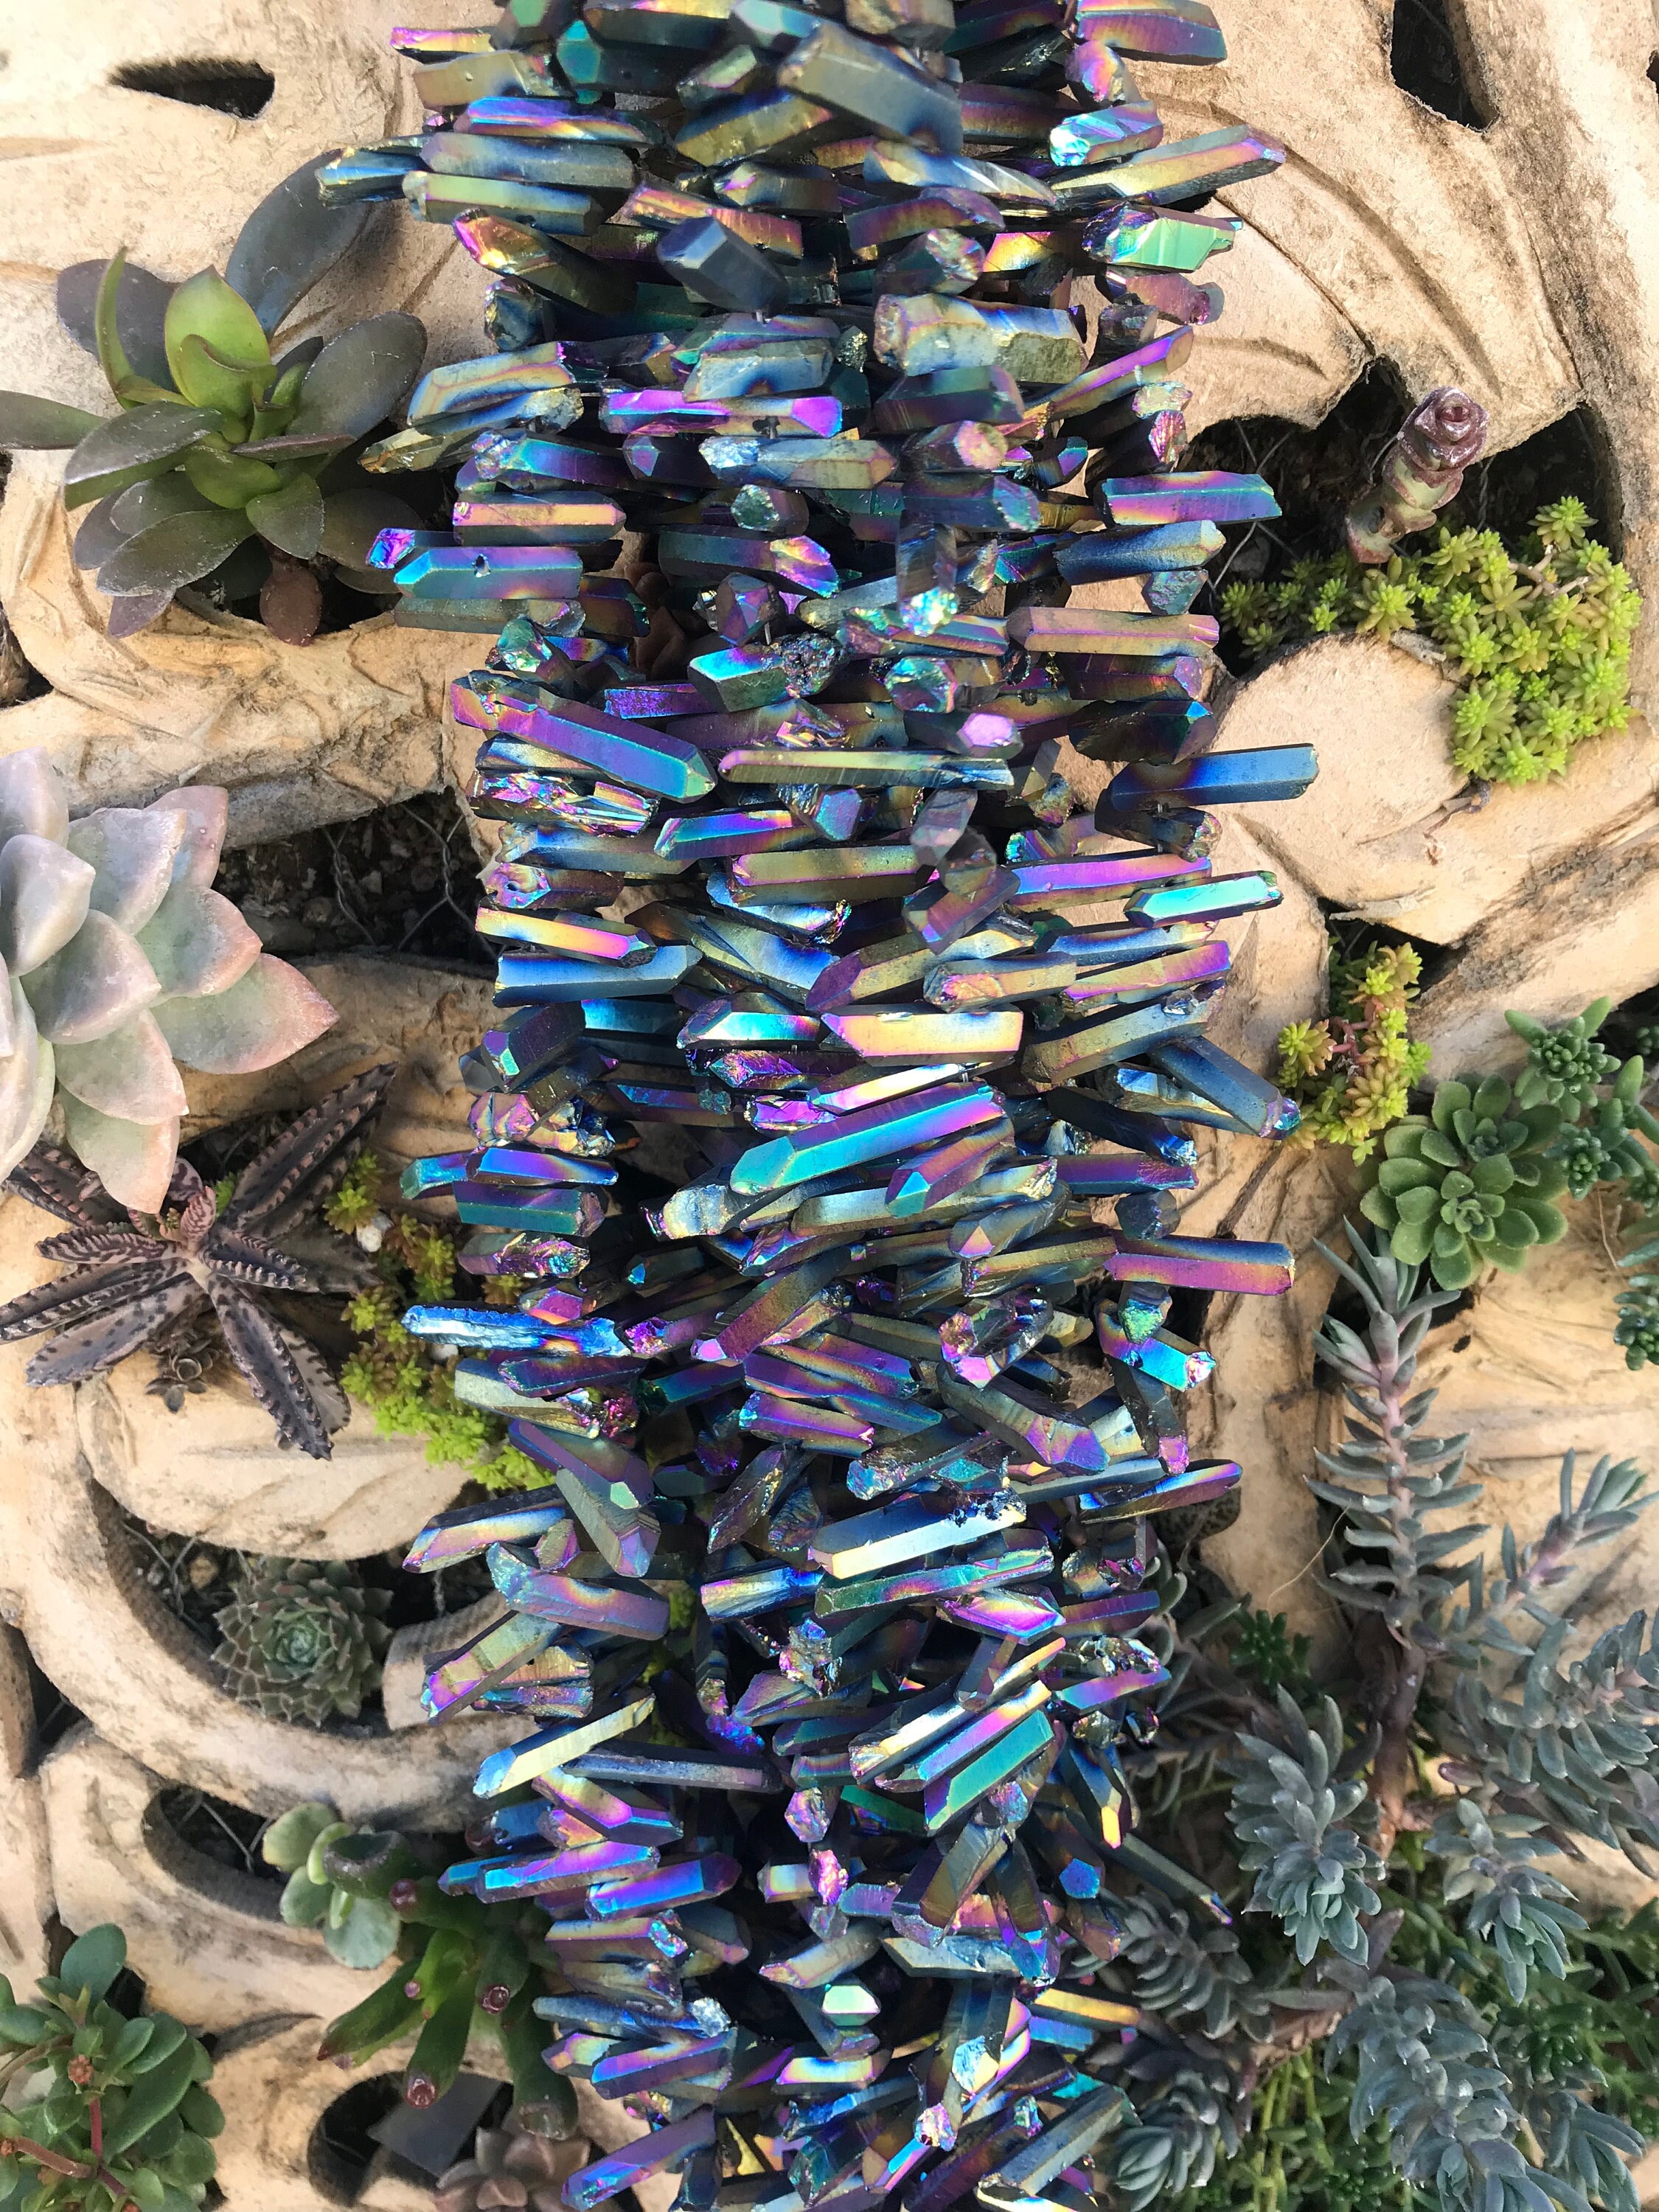 BEADIA Multicolor Titanium Coated Crystal Quartz Spike Point Stick Beads  Rough 0.8-1.2 for Jewelry Making 15 Inch/Strand